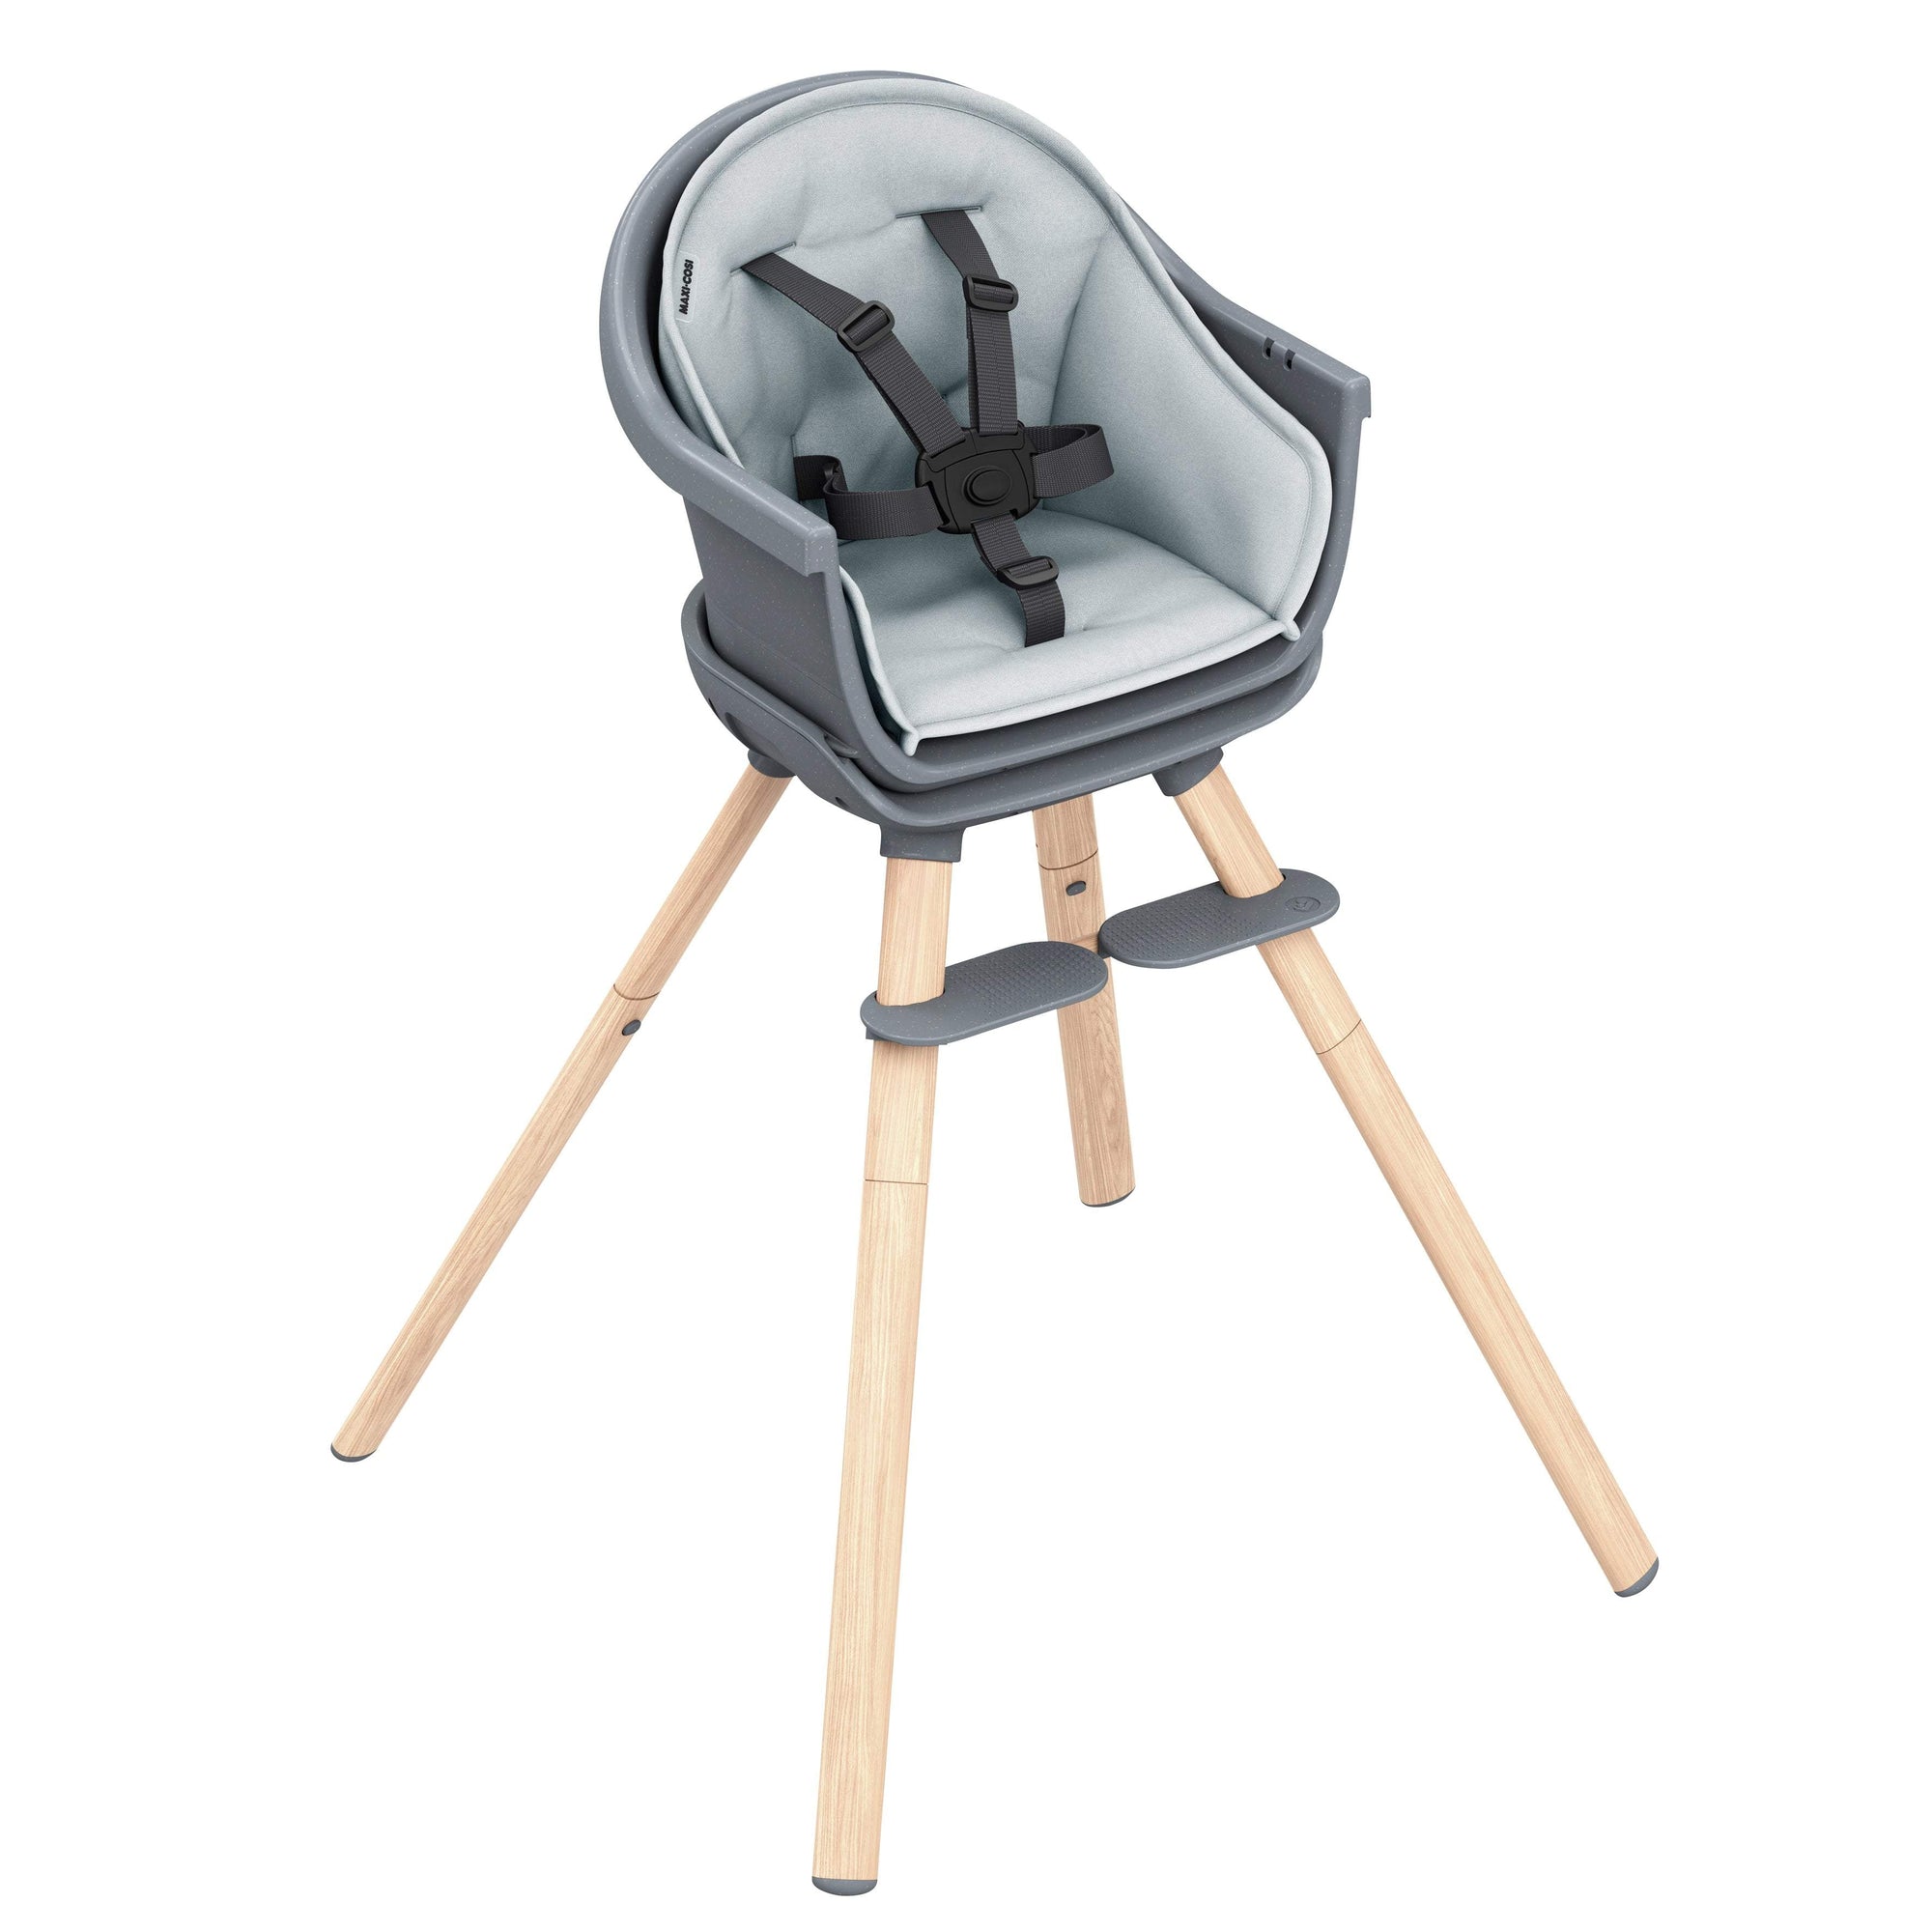 Maxi Cosi Moa High Chair || Fashion-Beyond Graphite || 6months to 36months - Toys4All.in